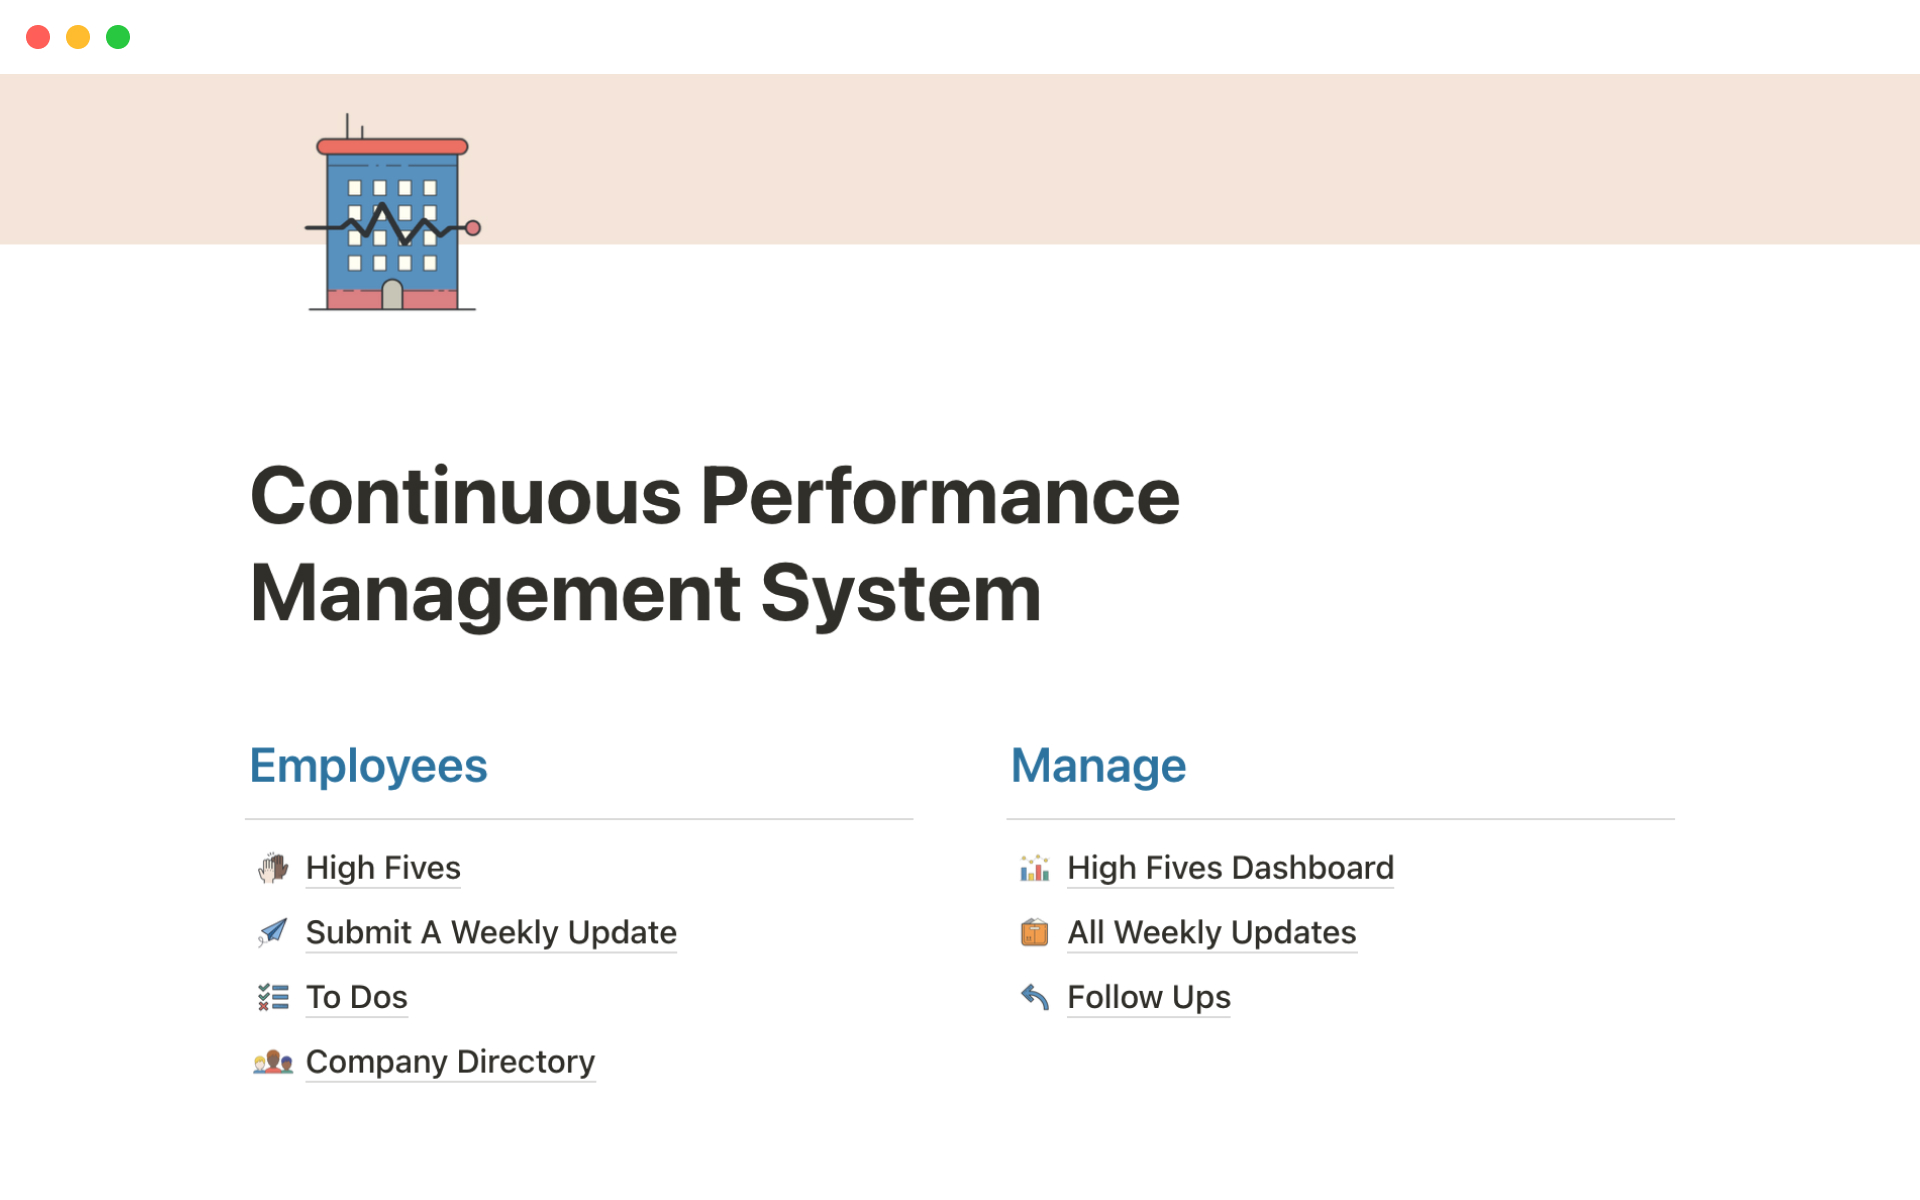 An all-encompassing system for organising and monitoring employee development and feedback.